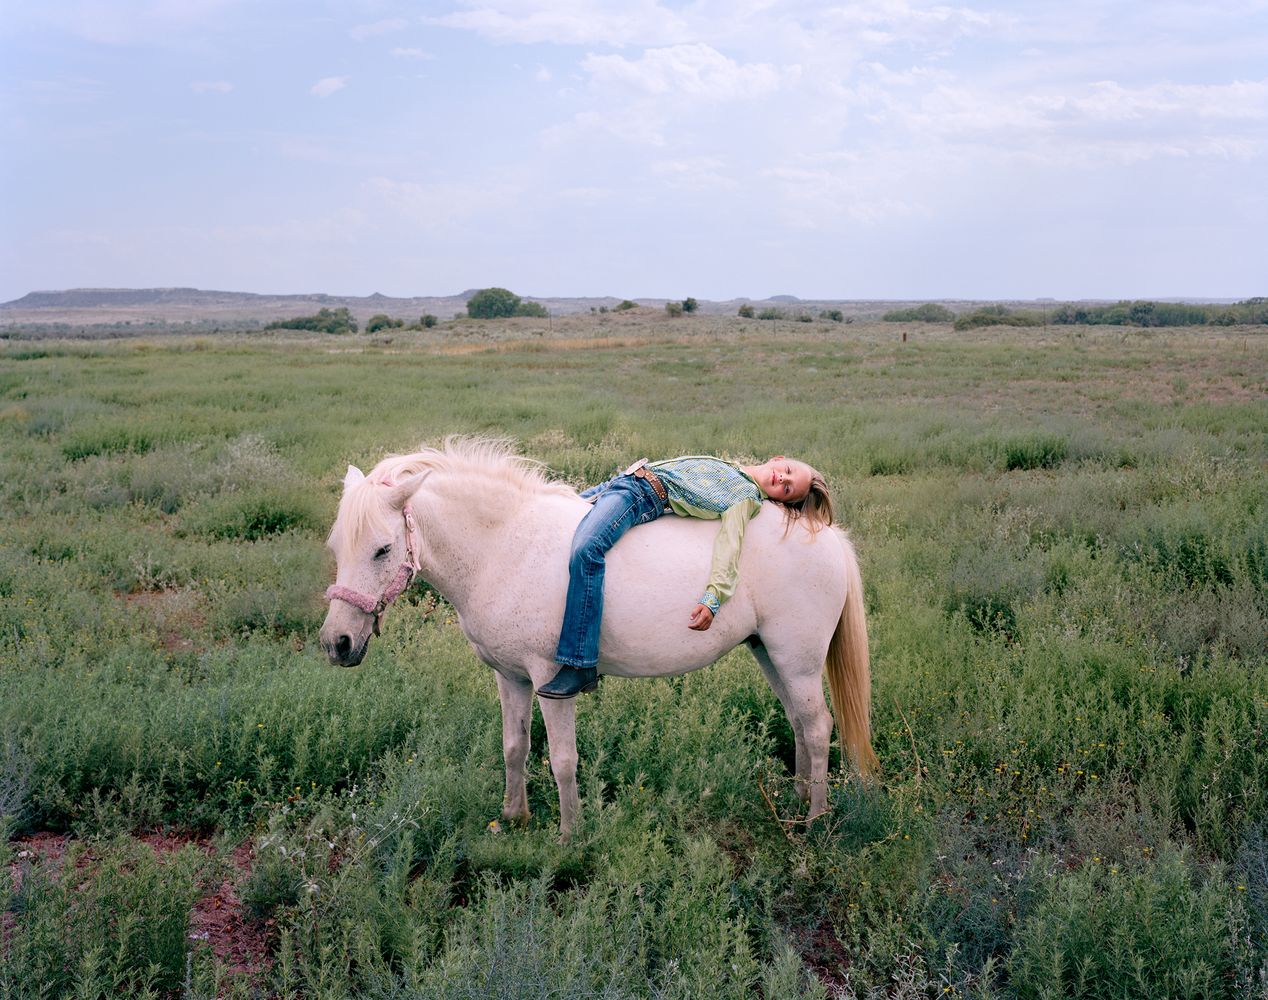 Young girl is reclining on a white pony, environmental portrait photography, Ilona Szwarc, contemporary Los Angeles artist.